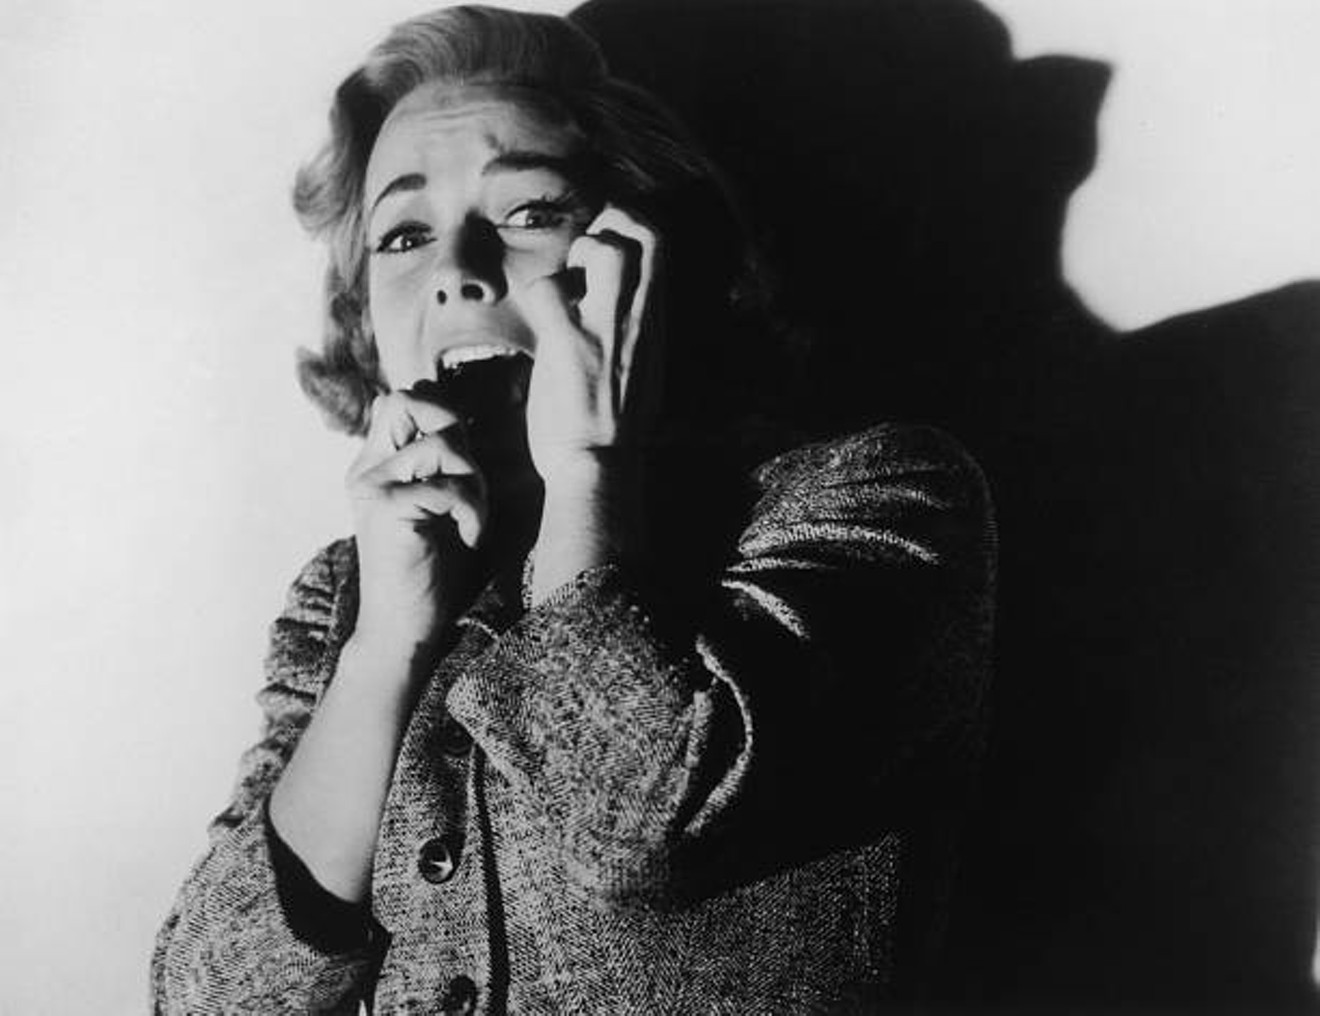 Vera Miles plays Lila Crane in Psycho, one of the best serial killer movies ever made.